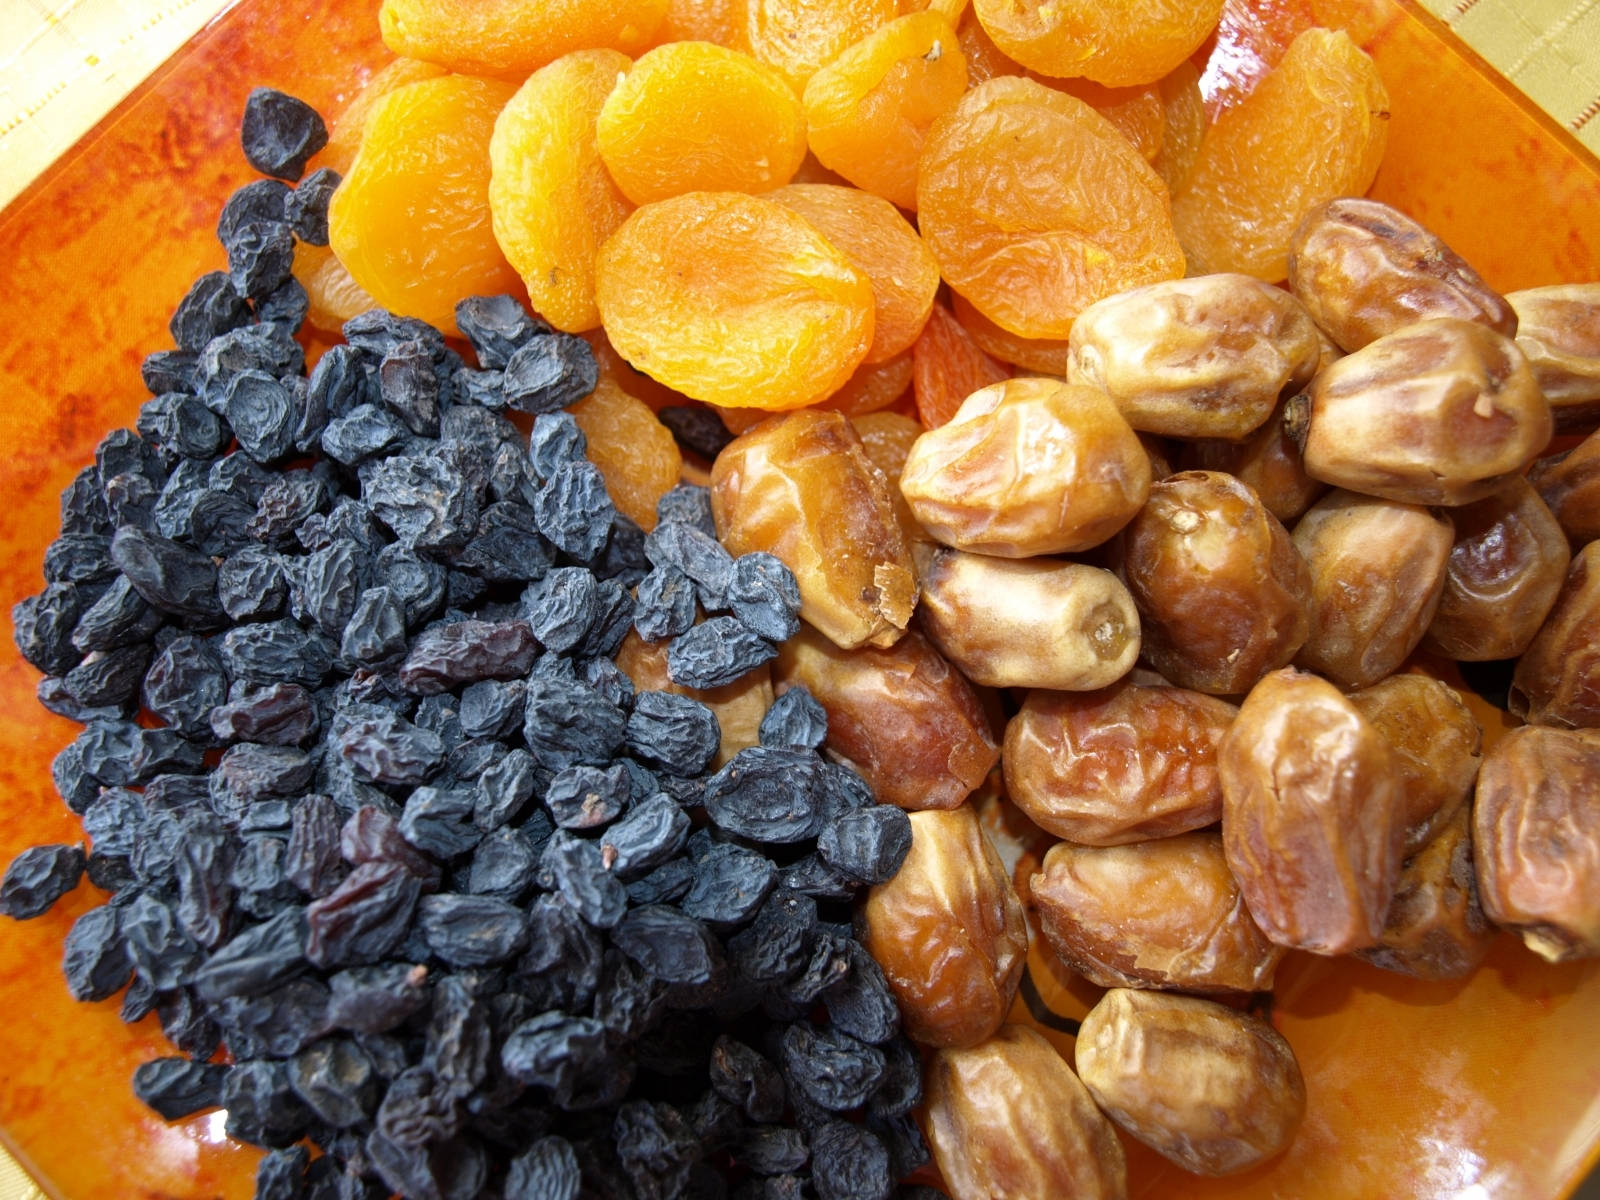 Assorted Dried Fruits including Currant, Apricot, and Raisin Wallpaper